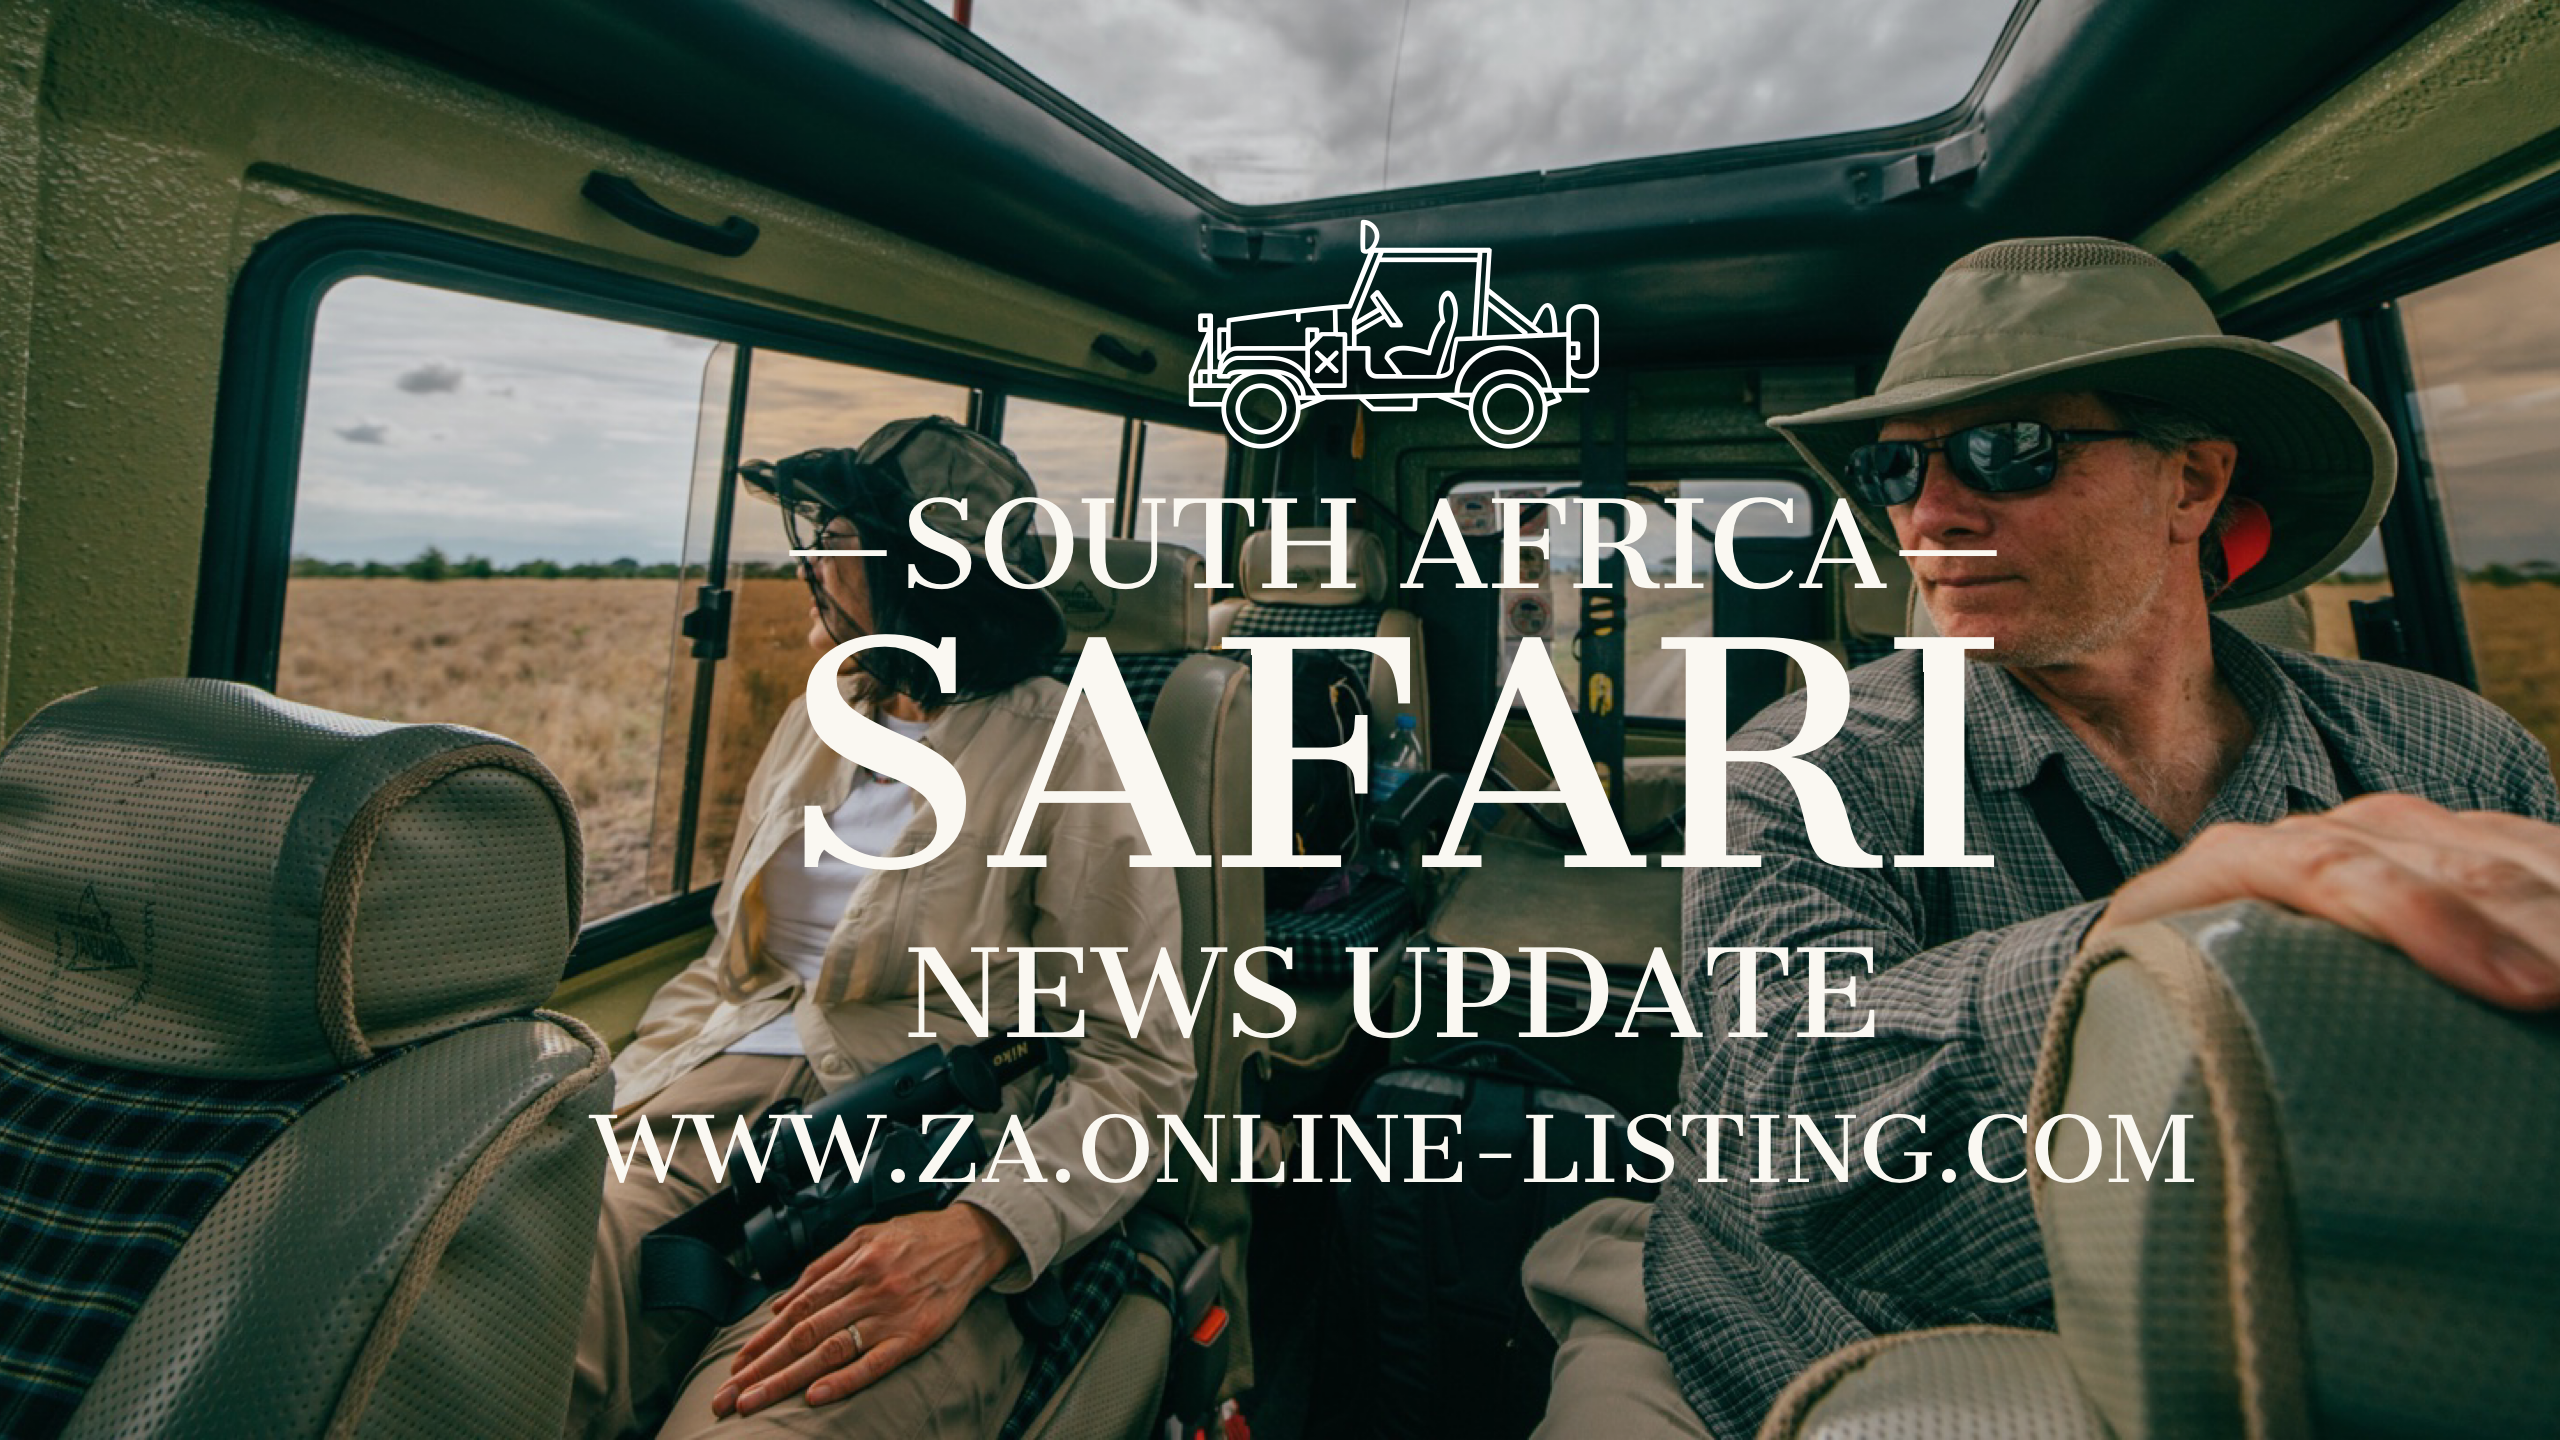 ZA Blog News Service in South Africa